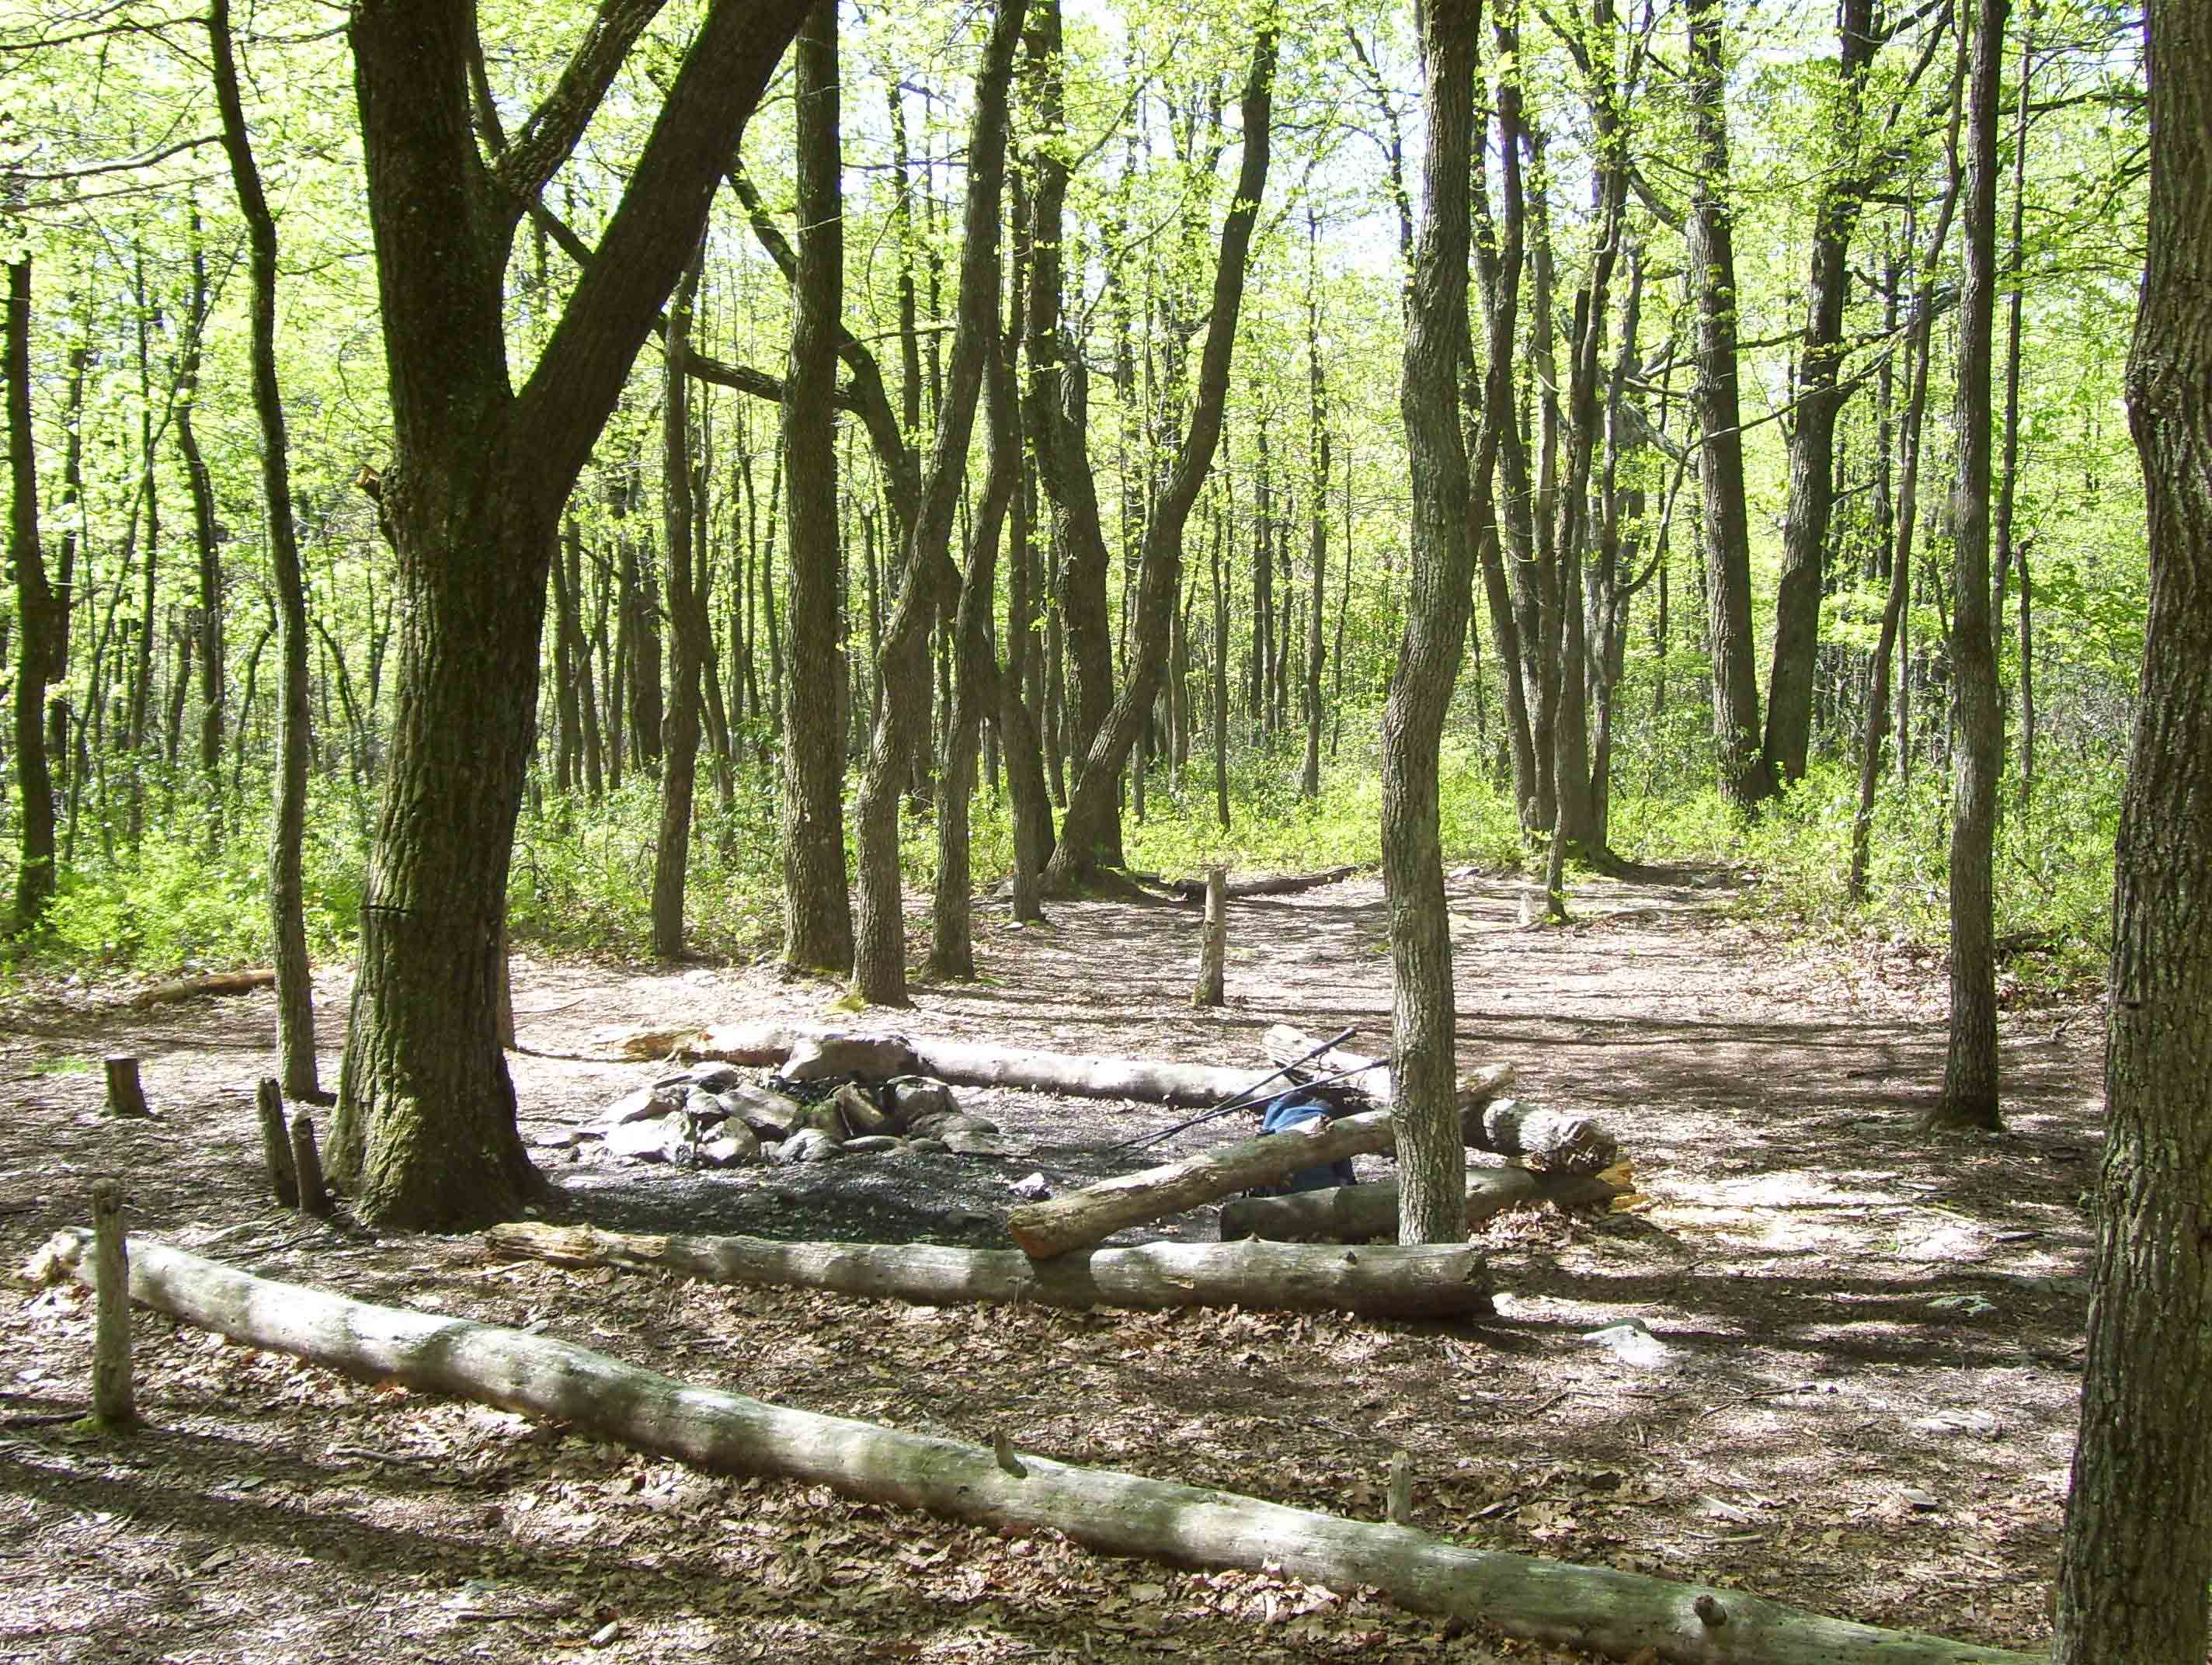 South bound from Birch Run shelter,  the trail climbs a hill.  This campsite is at the top of the hill.  Taken at approx. mm 10.0.  Courtesy dlcul@conncoll.edu